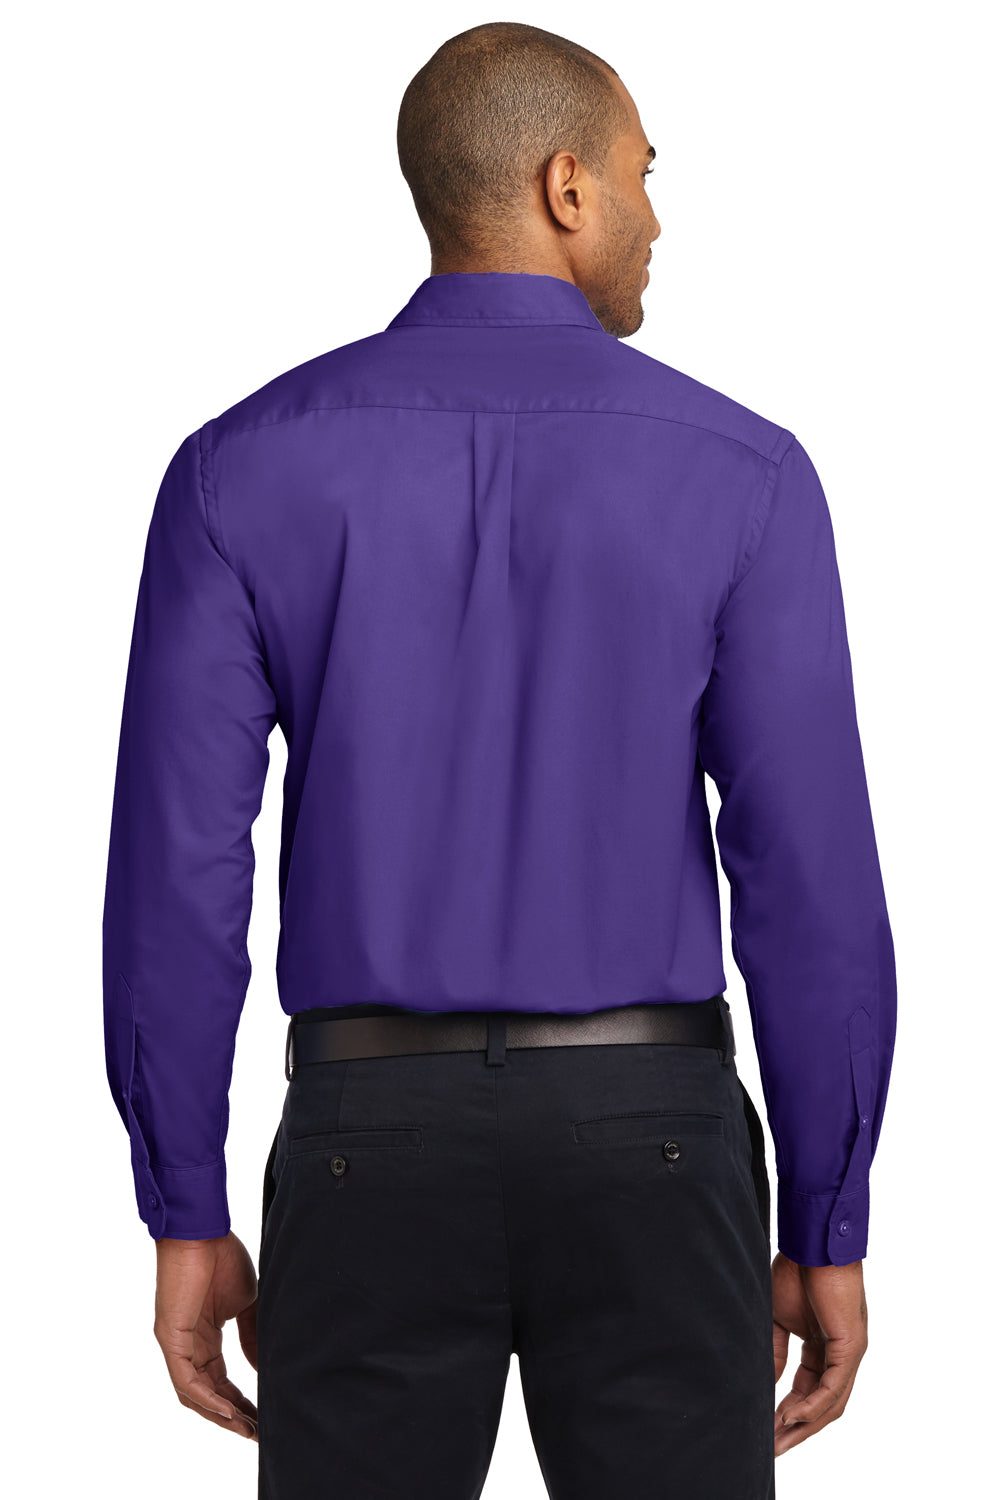 Port Authority S608/TLS608/S608ES Mens Easy Care Wrinkle Resistant Long Sleeve Button Down Shirt w/ Pocket Purple Back